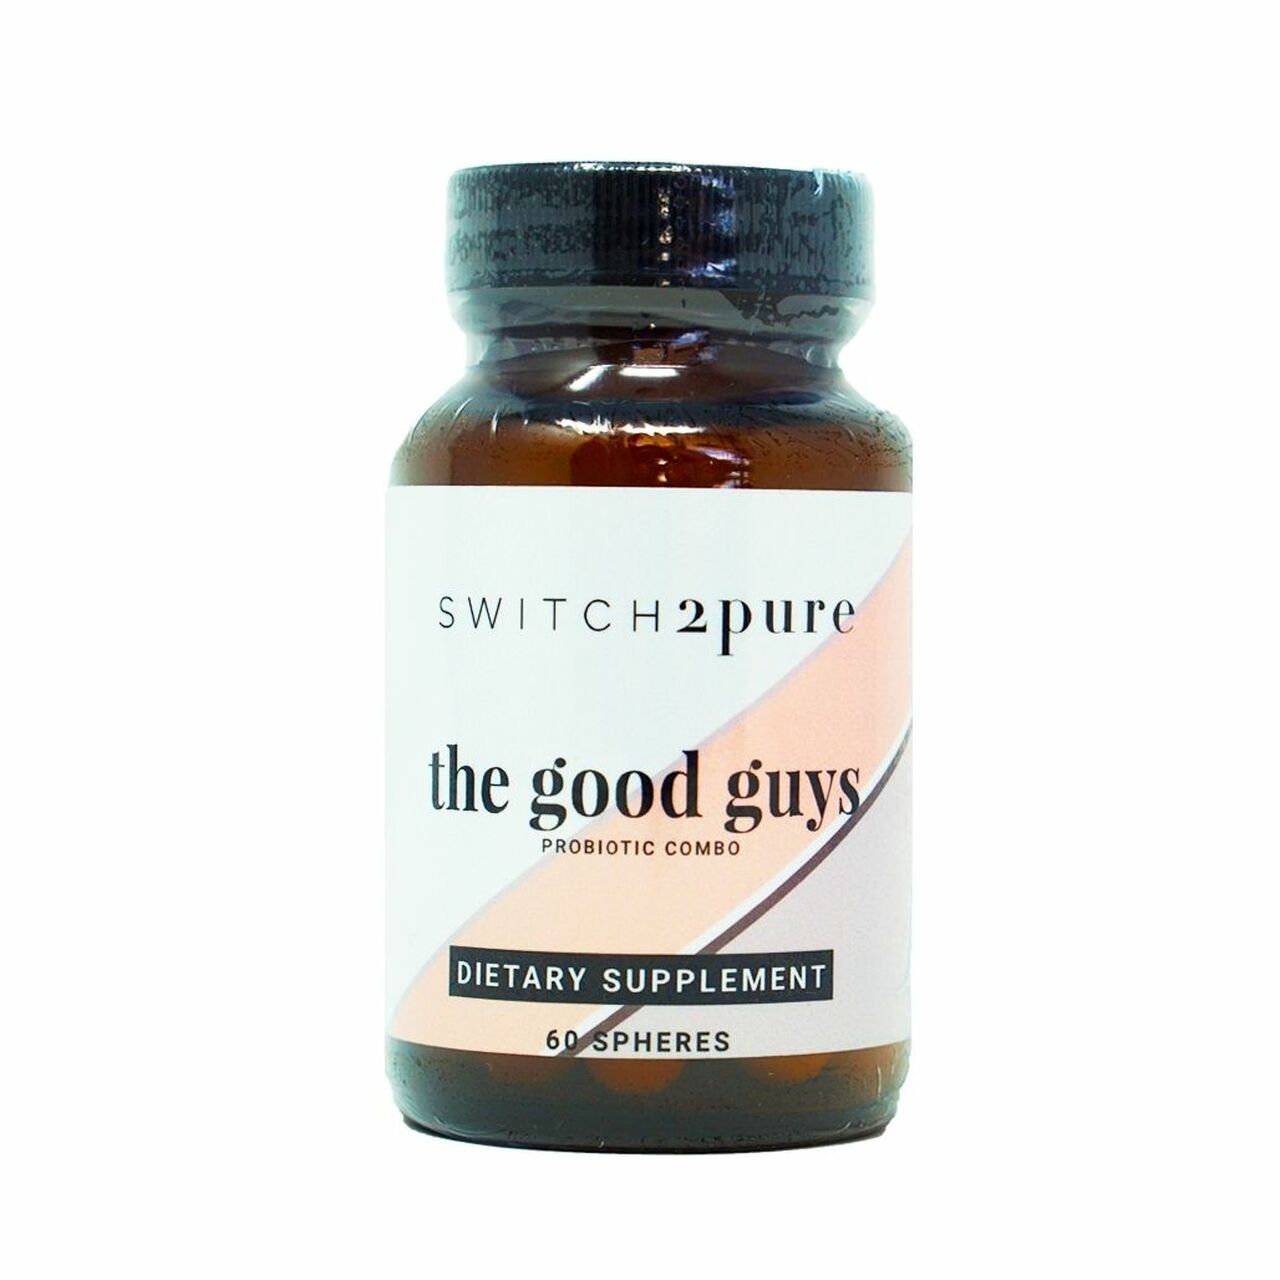 Switch2pure probiotic the good guys